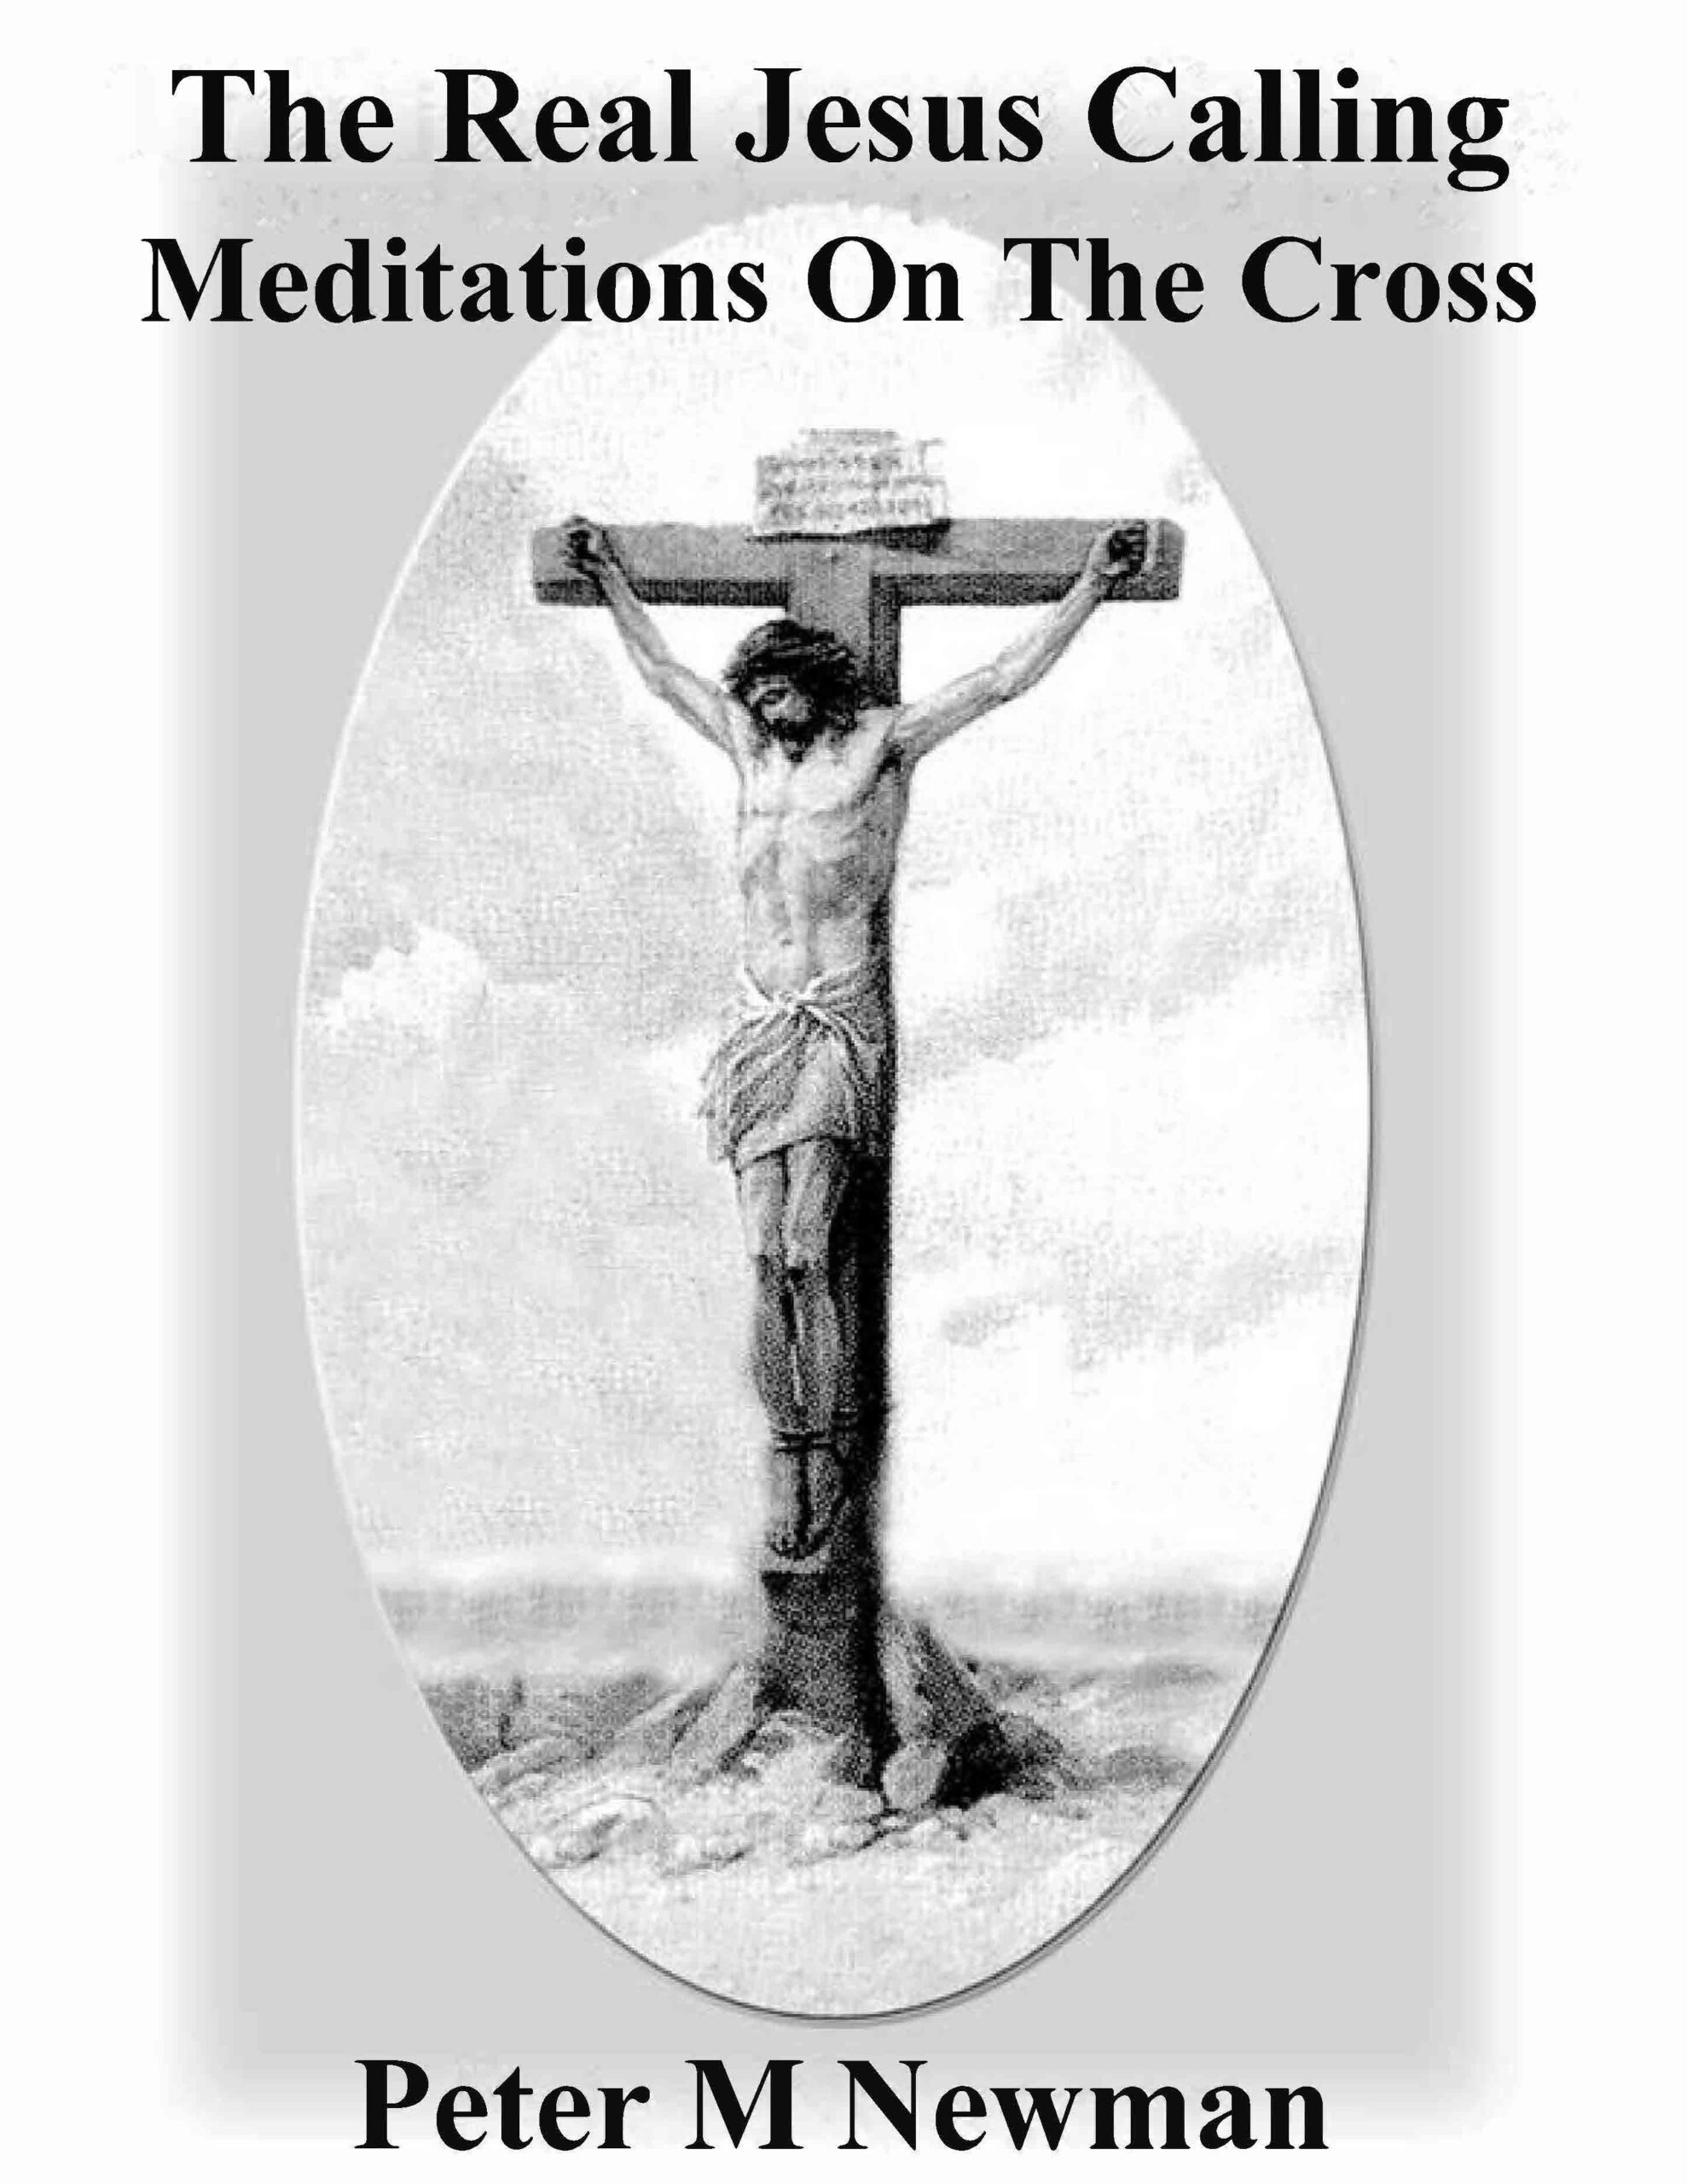 The Real Jesus Calling: Meditations on the Cross